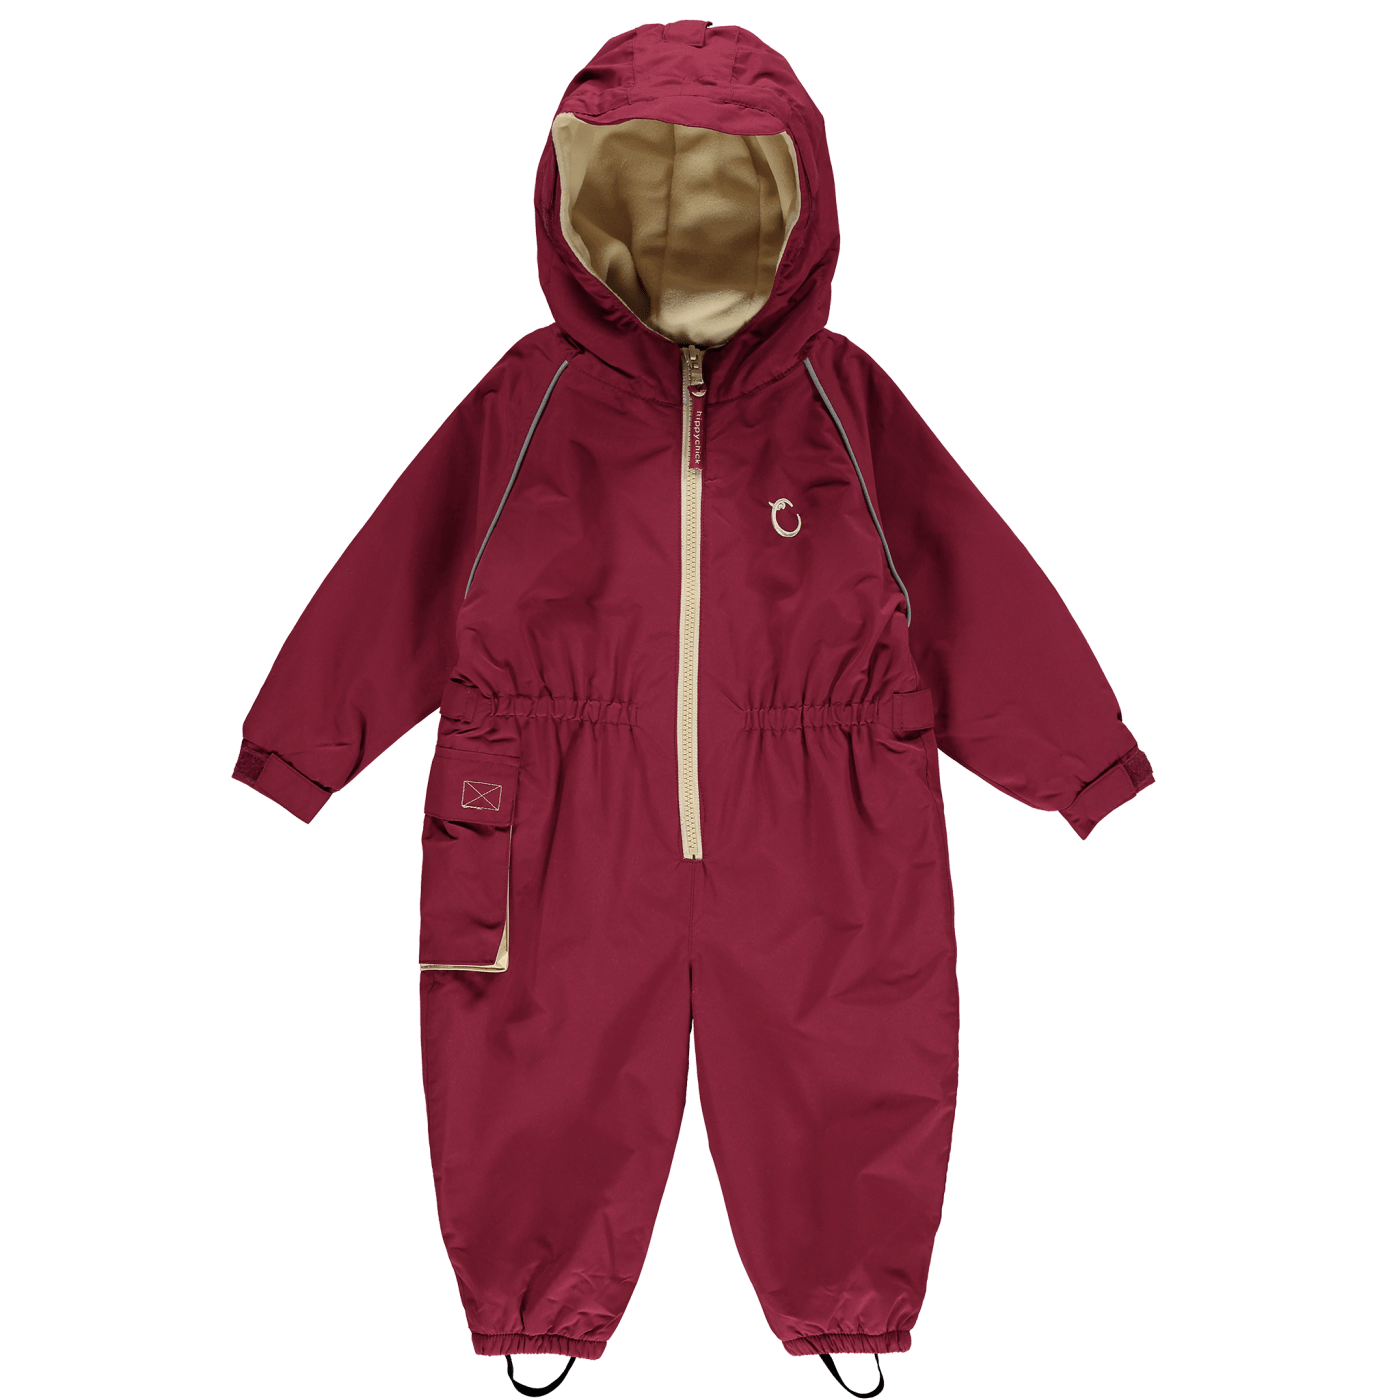 The Hippychick toddler waterproof suit is fleece lined and has been designed to be completely windproof and breathable, ensuring complete comfort and protection in all weathers. 